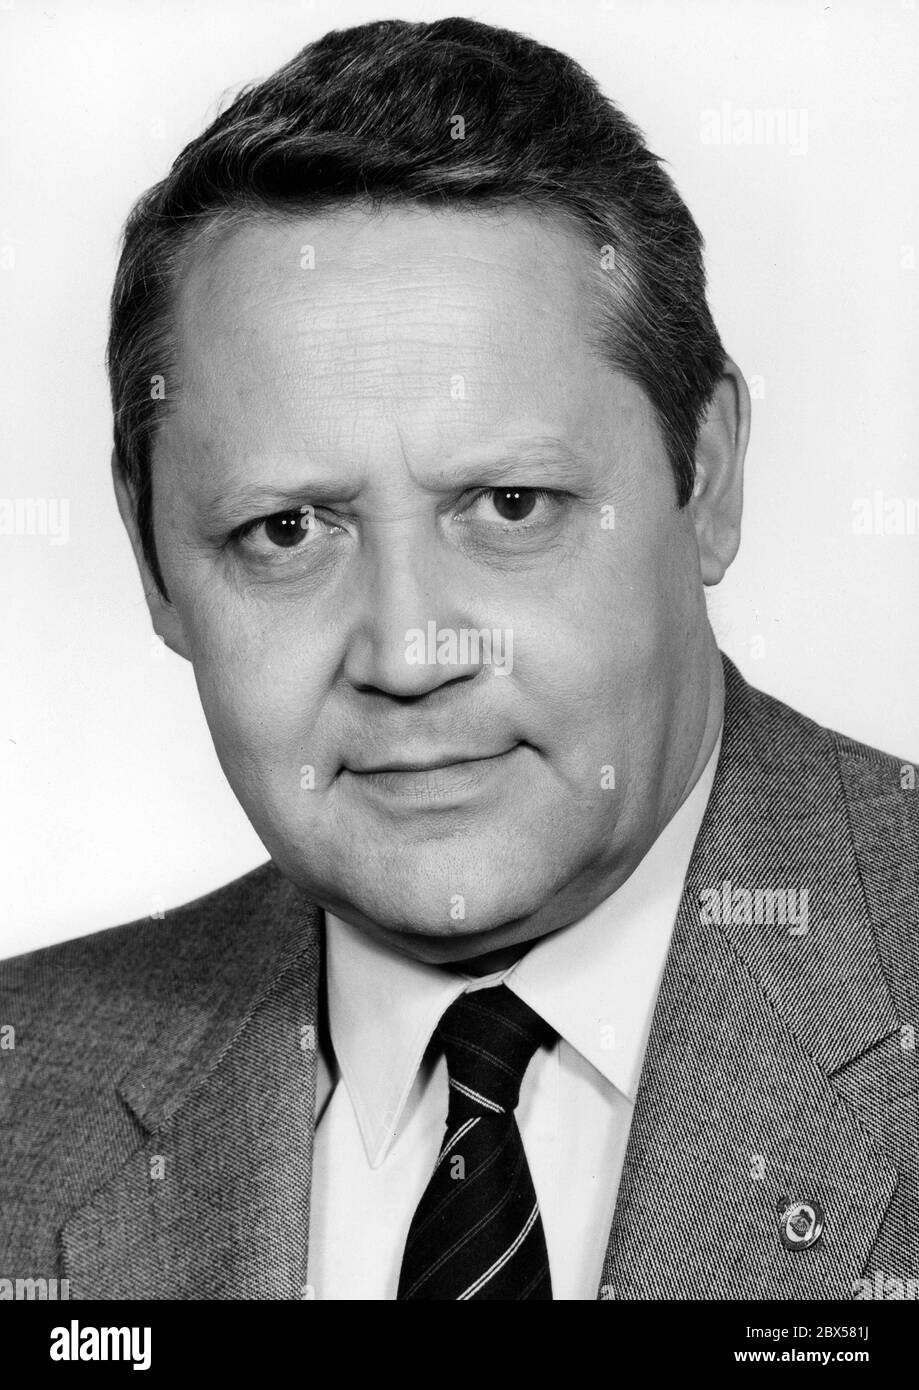 Guenter Schabowski - * 04.01.1929 1978 - in 1985 was Editor-in-chief of 'Neues Deutschland', between 1985 - 1989 was 1st Secretary of the SED district administration Berlin, between 1981 - 1989 Member of the SED Central Committee, between 1984 - 1989 Member of the SED Politburo. Schabowski read out the news about the opening of the Wall on the evening of November 9, 1989 at a press conference in East Berlin. Stock Photo